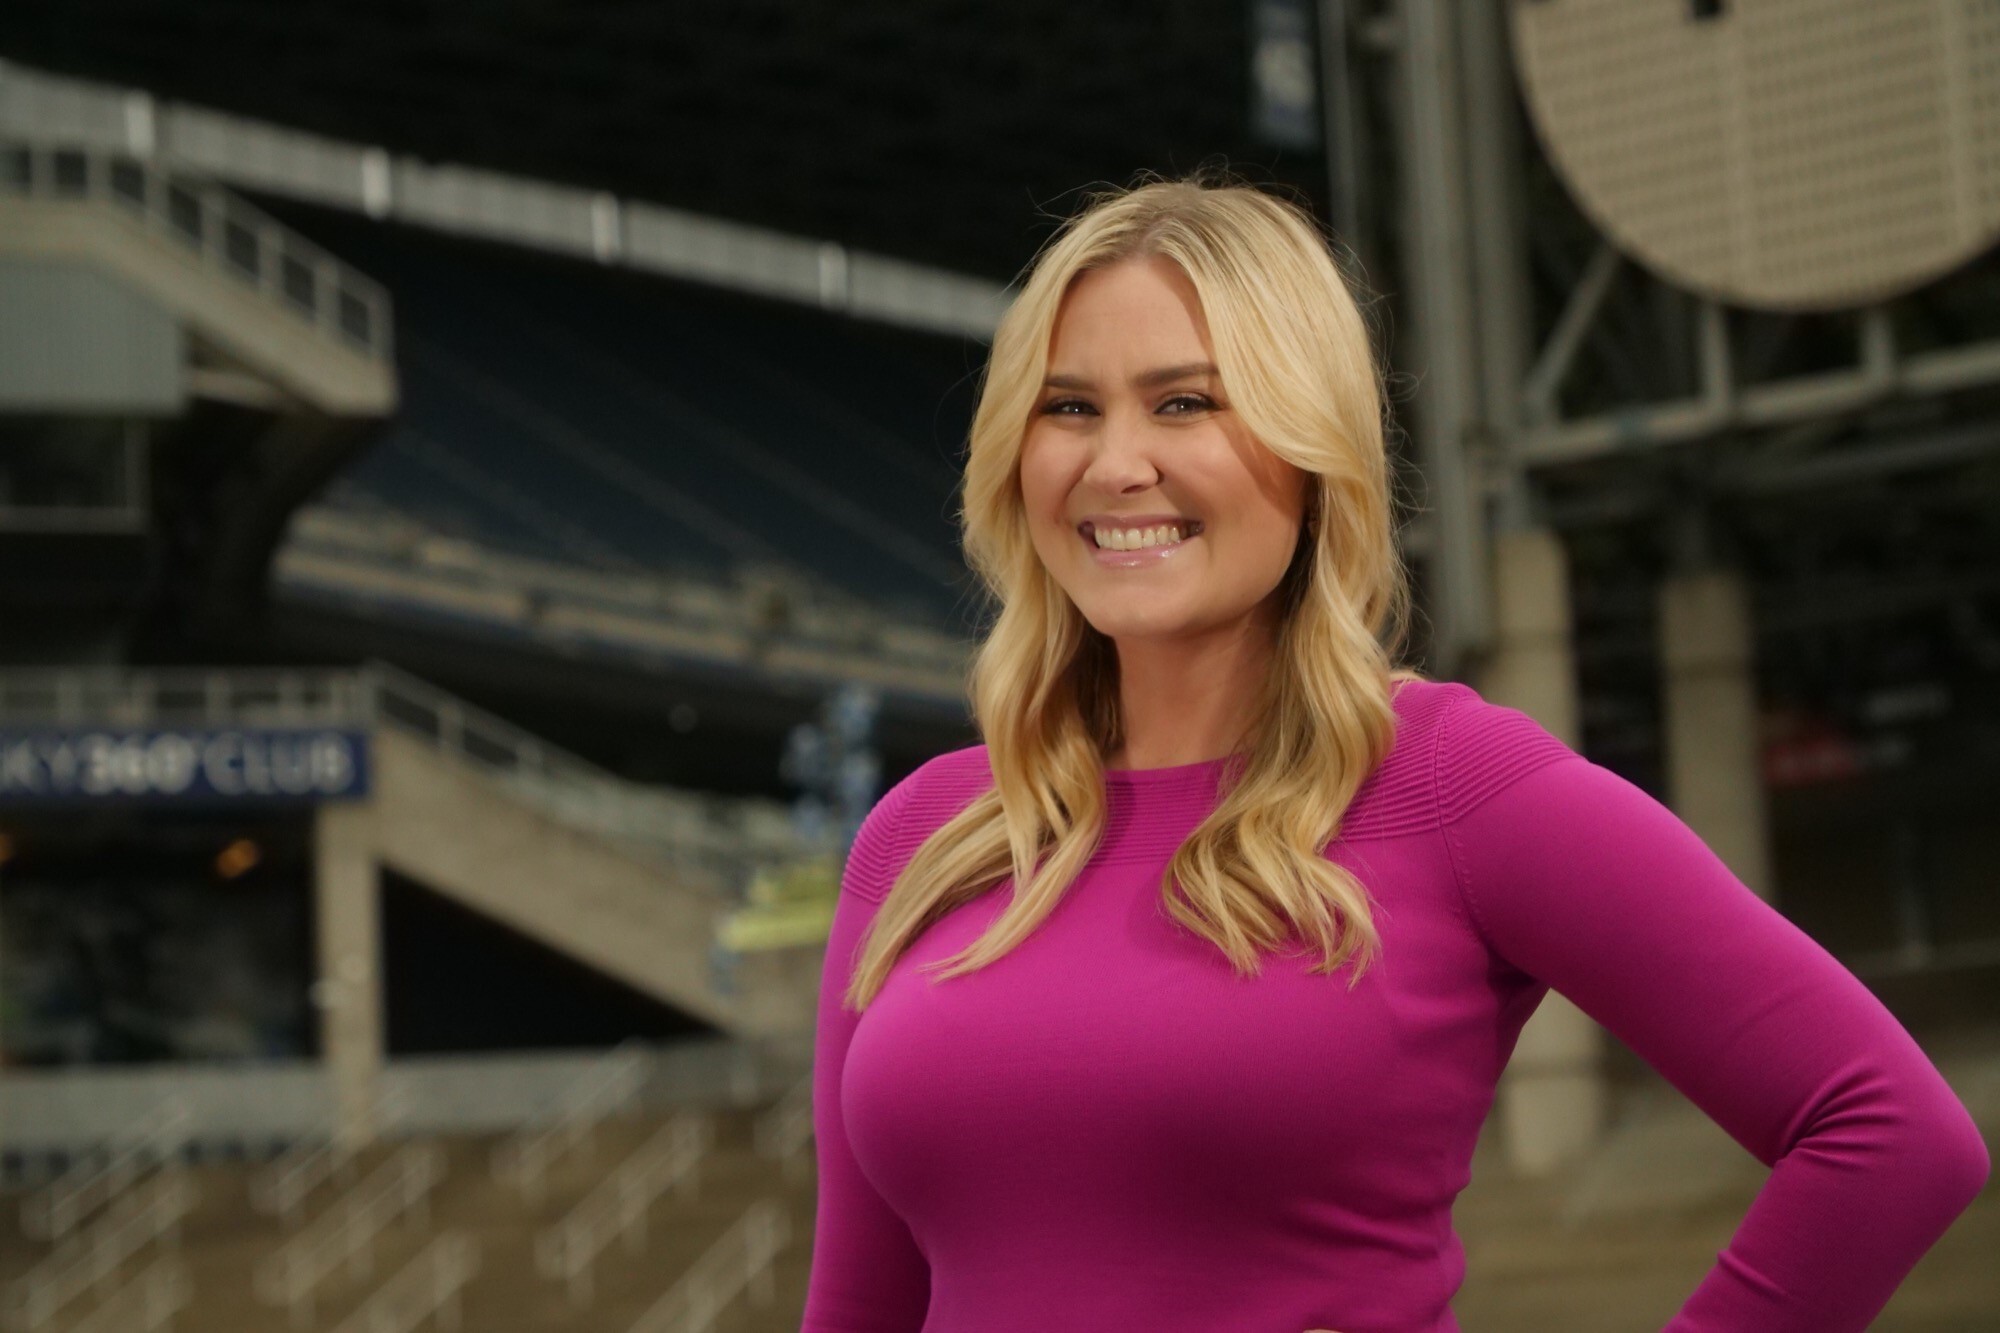 MEET THE MEDIA Michelle Ludtka, Q13 News Sports Anchor and Reporter